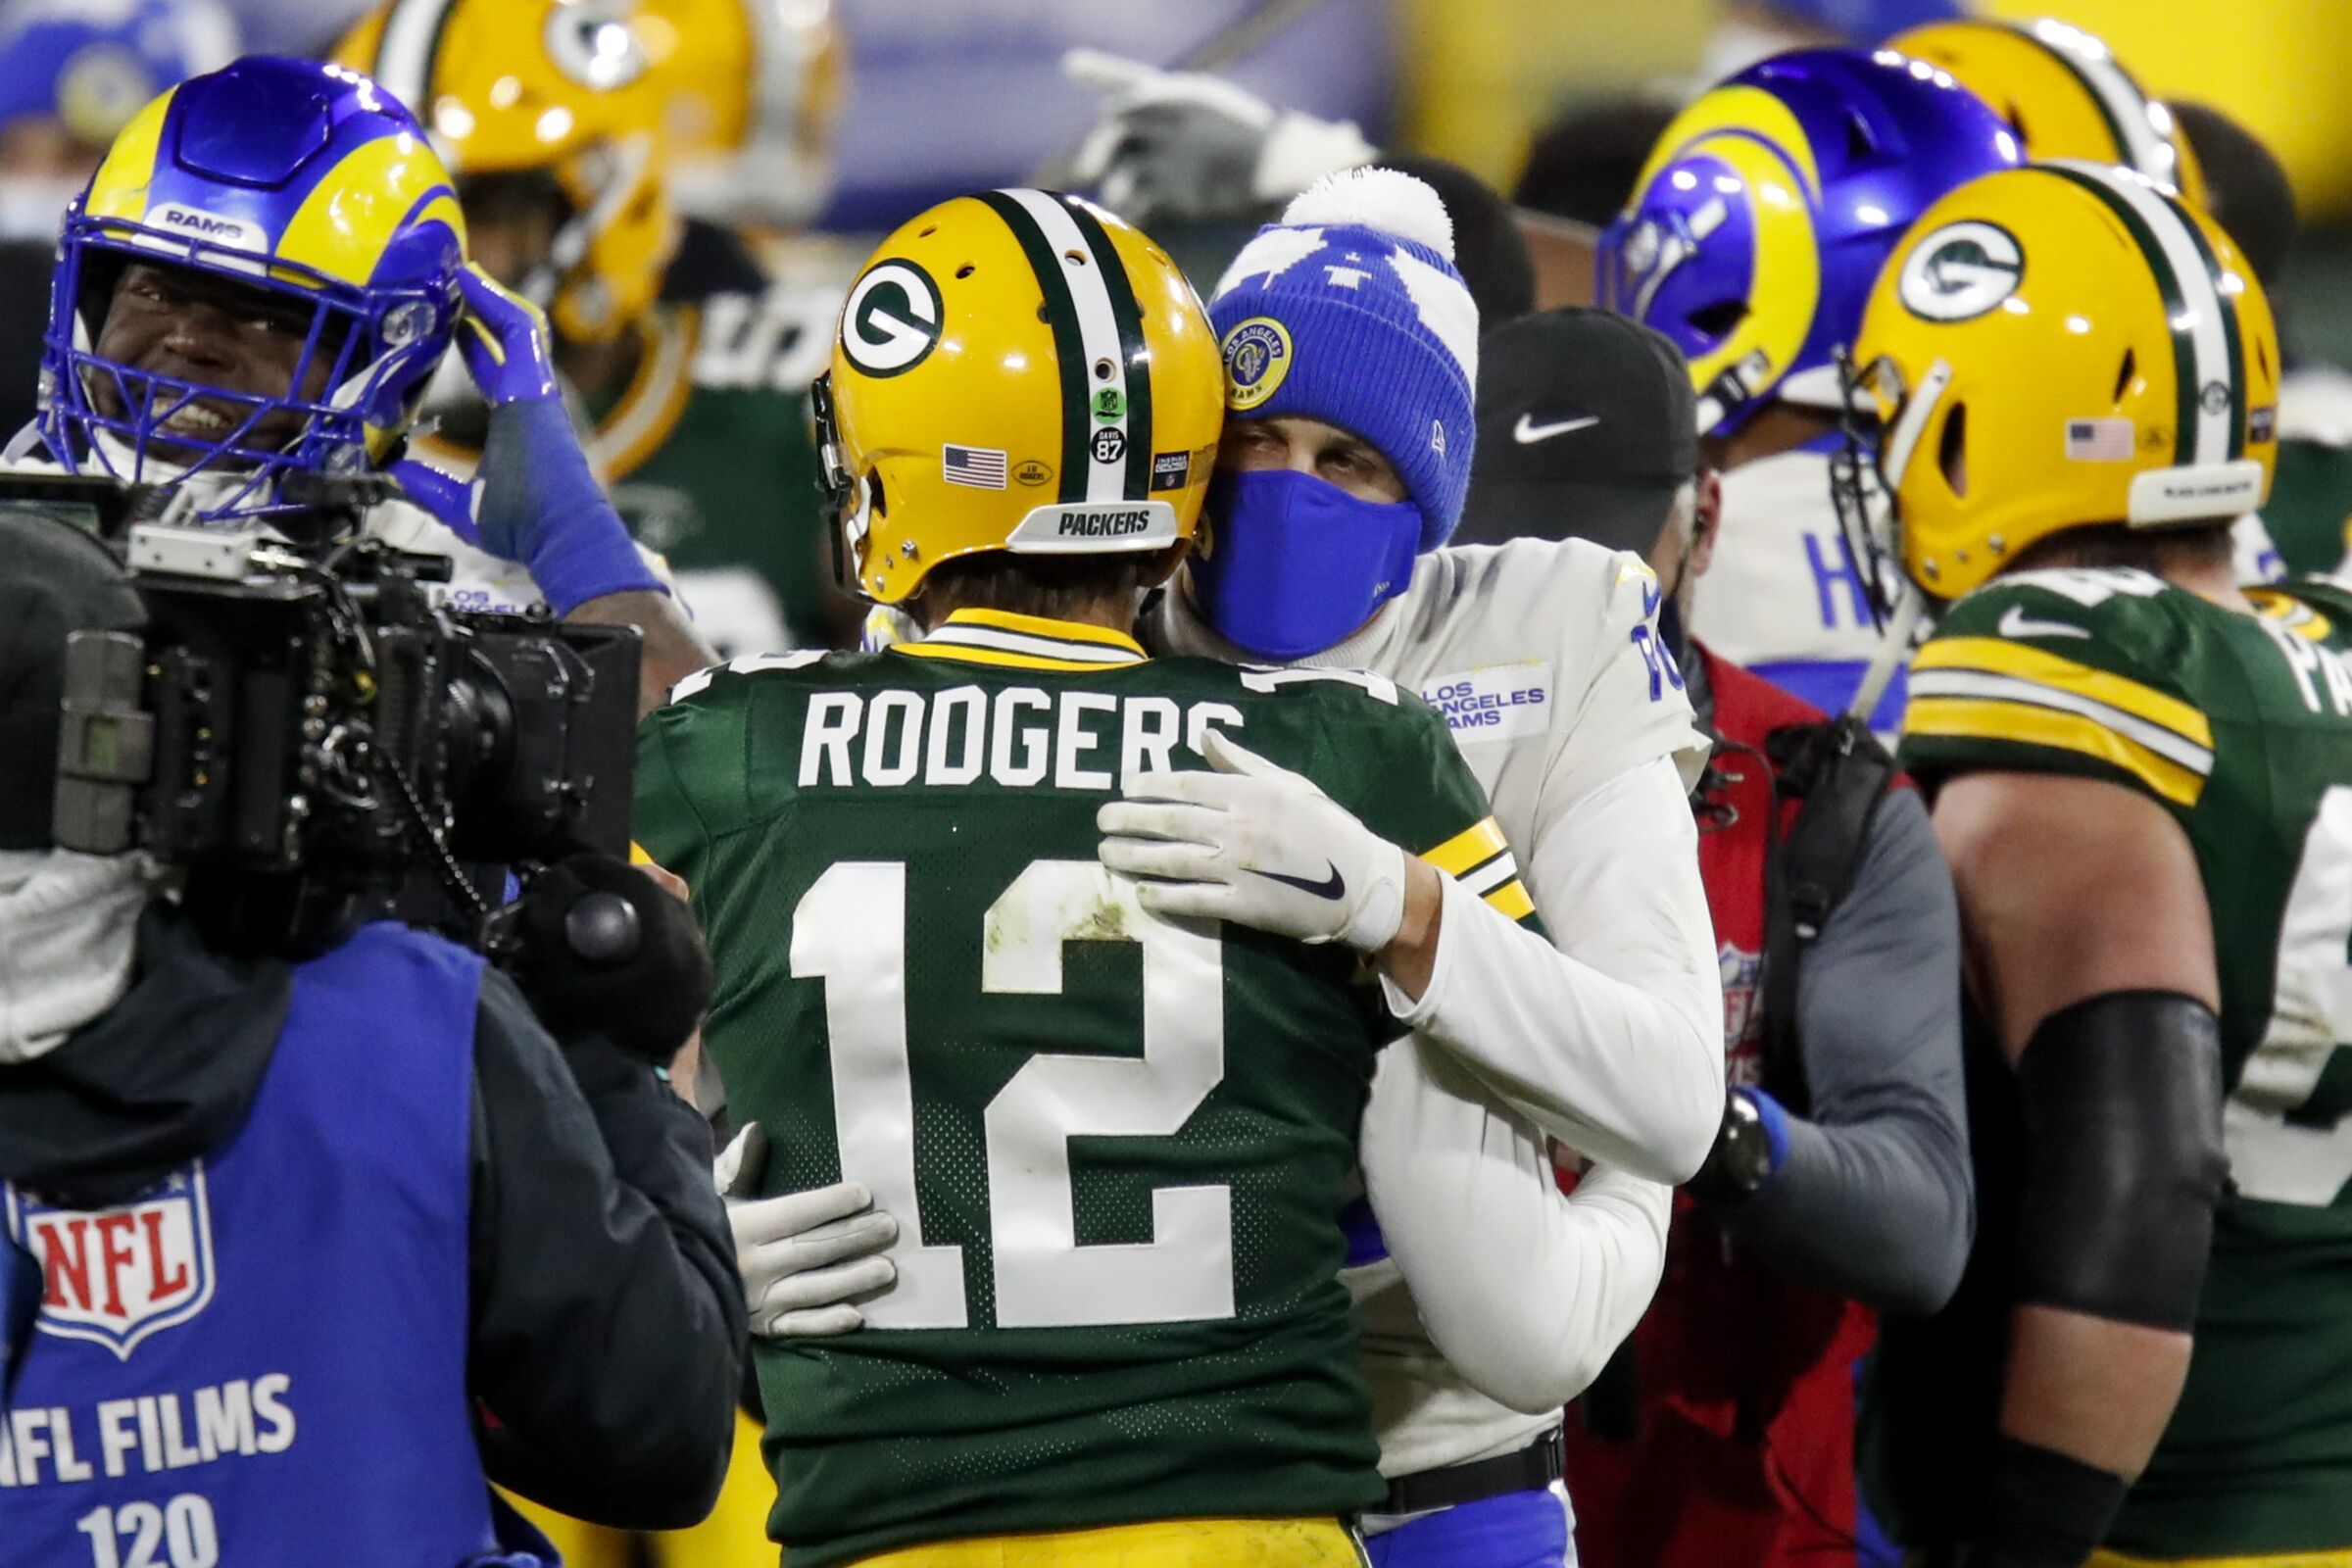 Green Bay Packers quarterback Aaron Rodgers is congratulated by Los Angeles Rams quarterback Jared Goff.